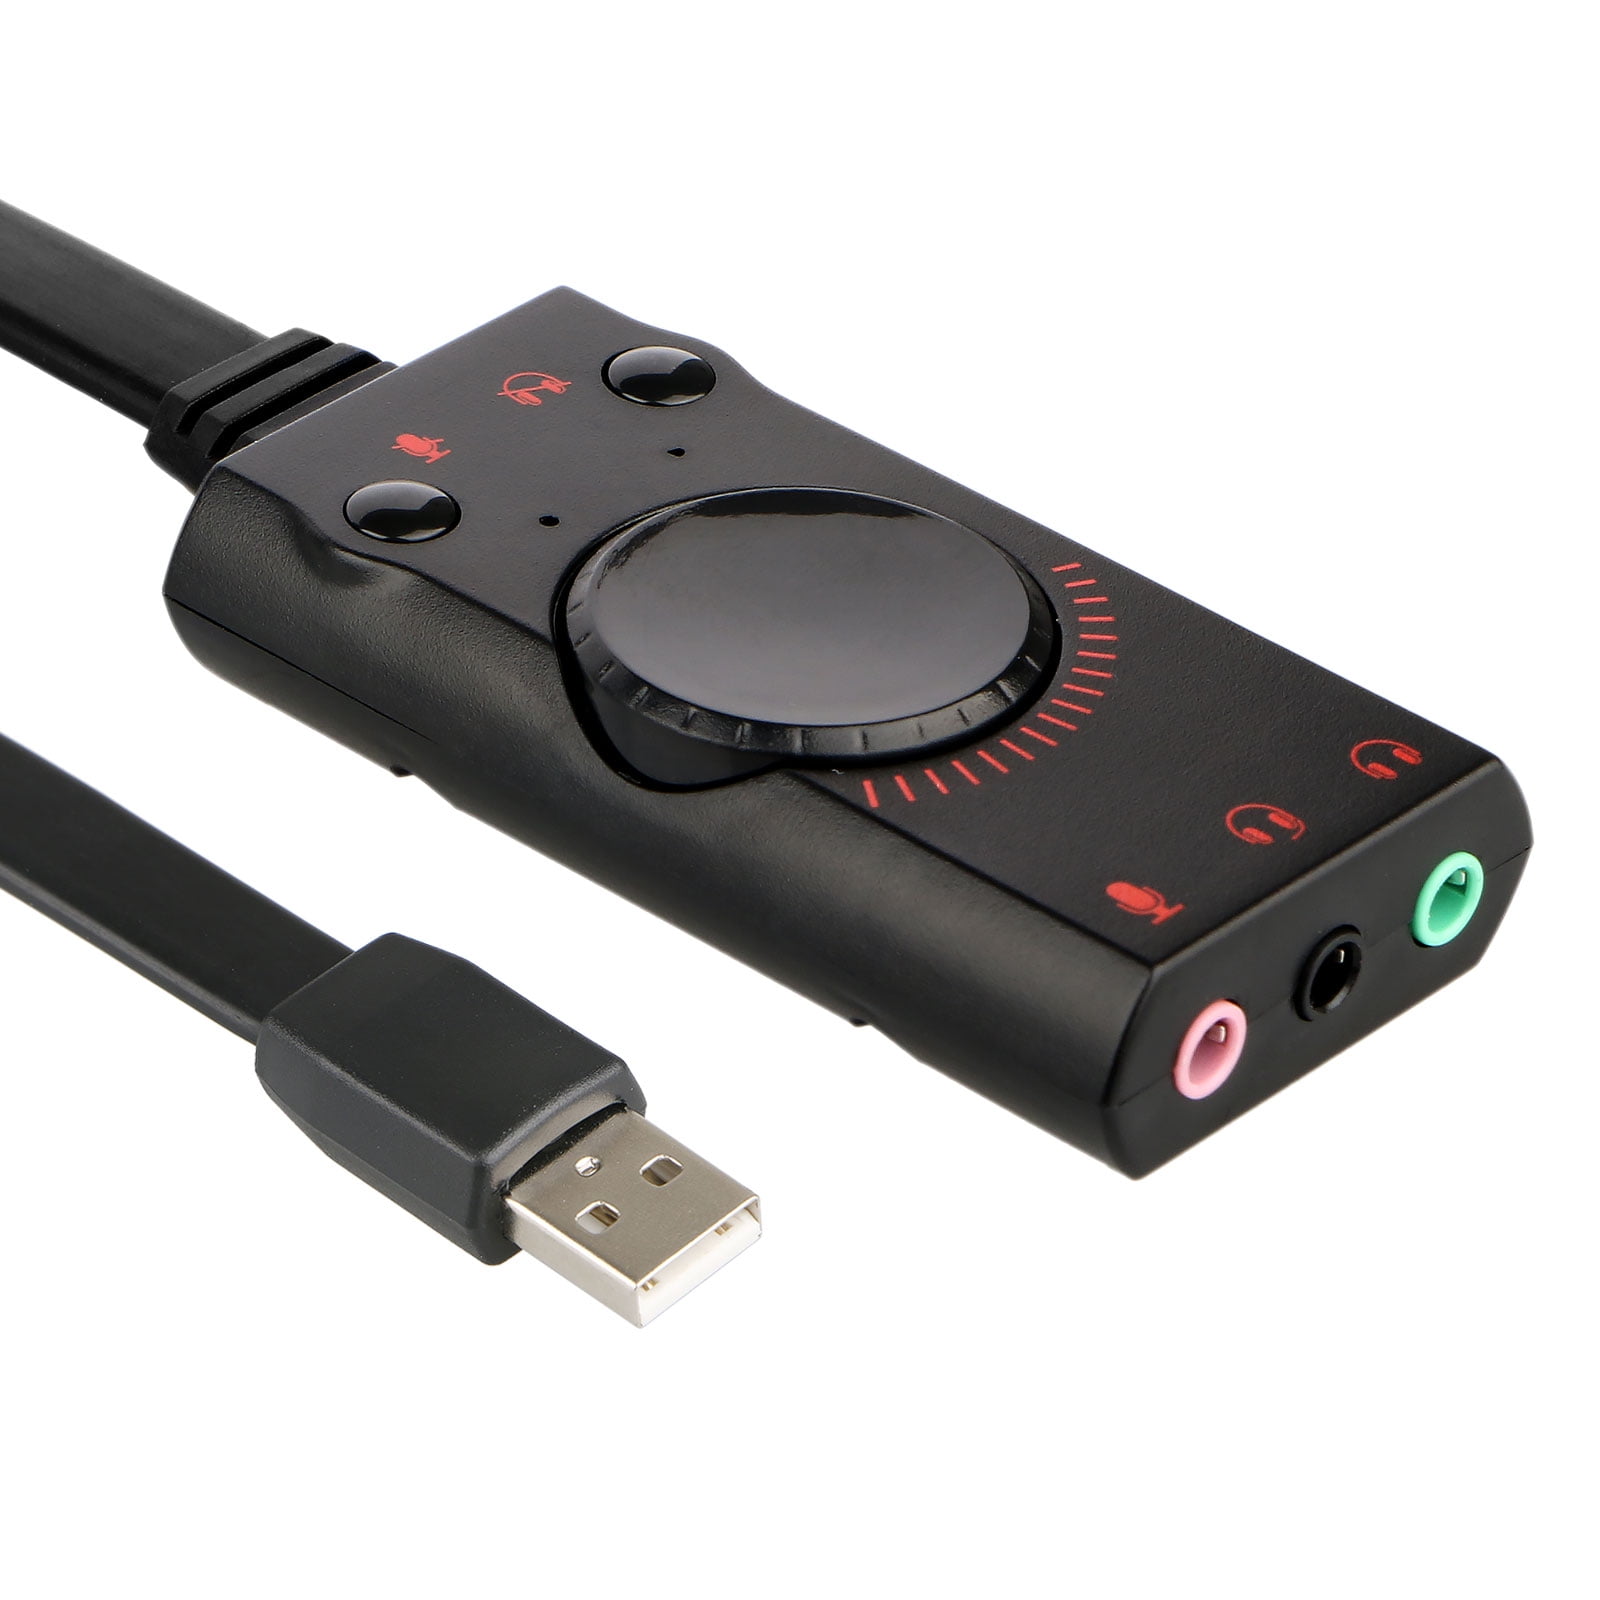 Usb microphone adapter